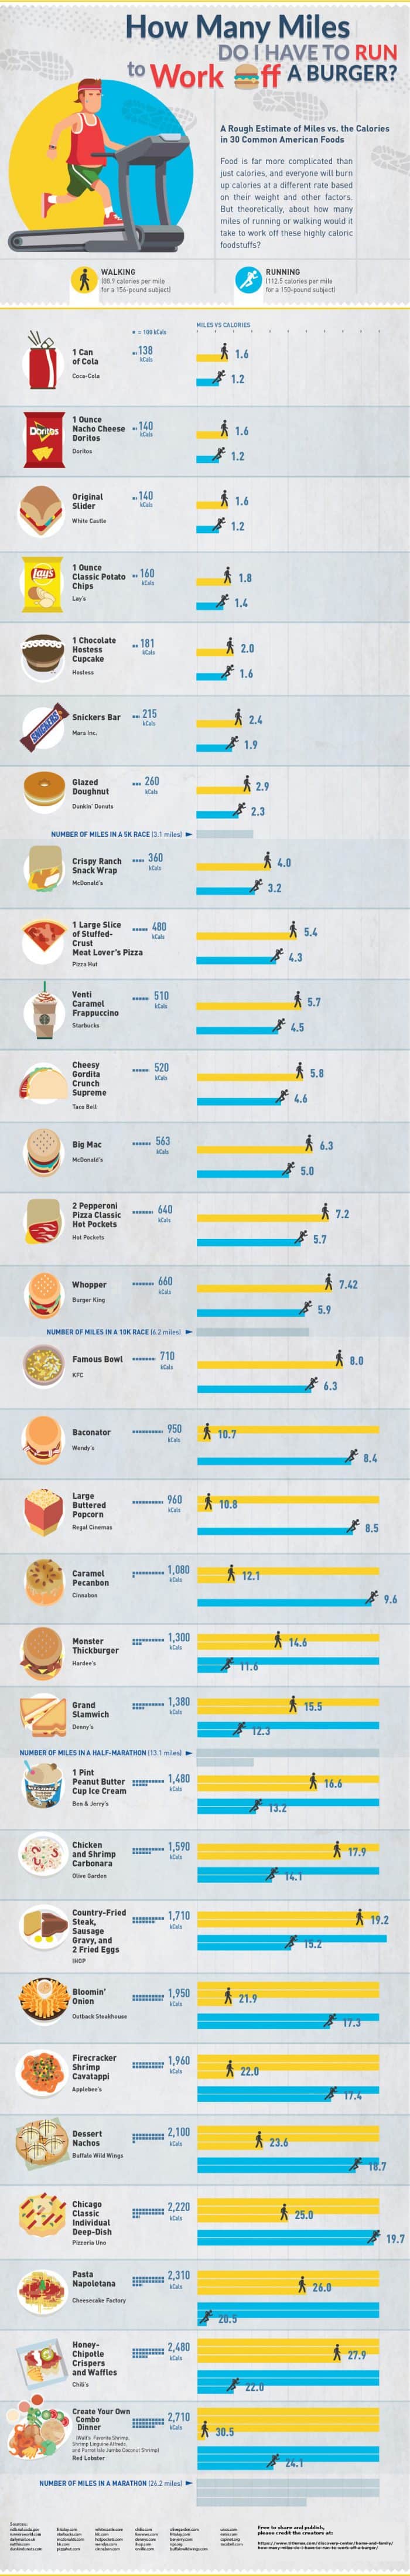 infographic depicting how much exercise is required to burn off junk food calories